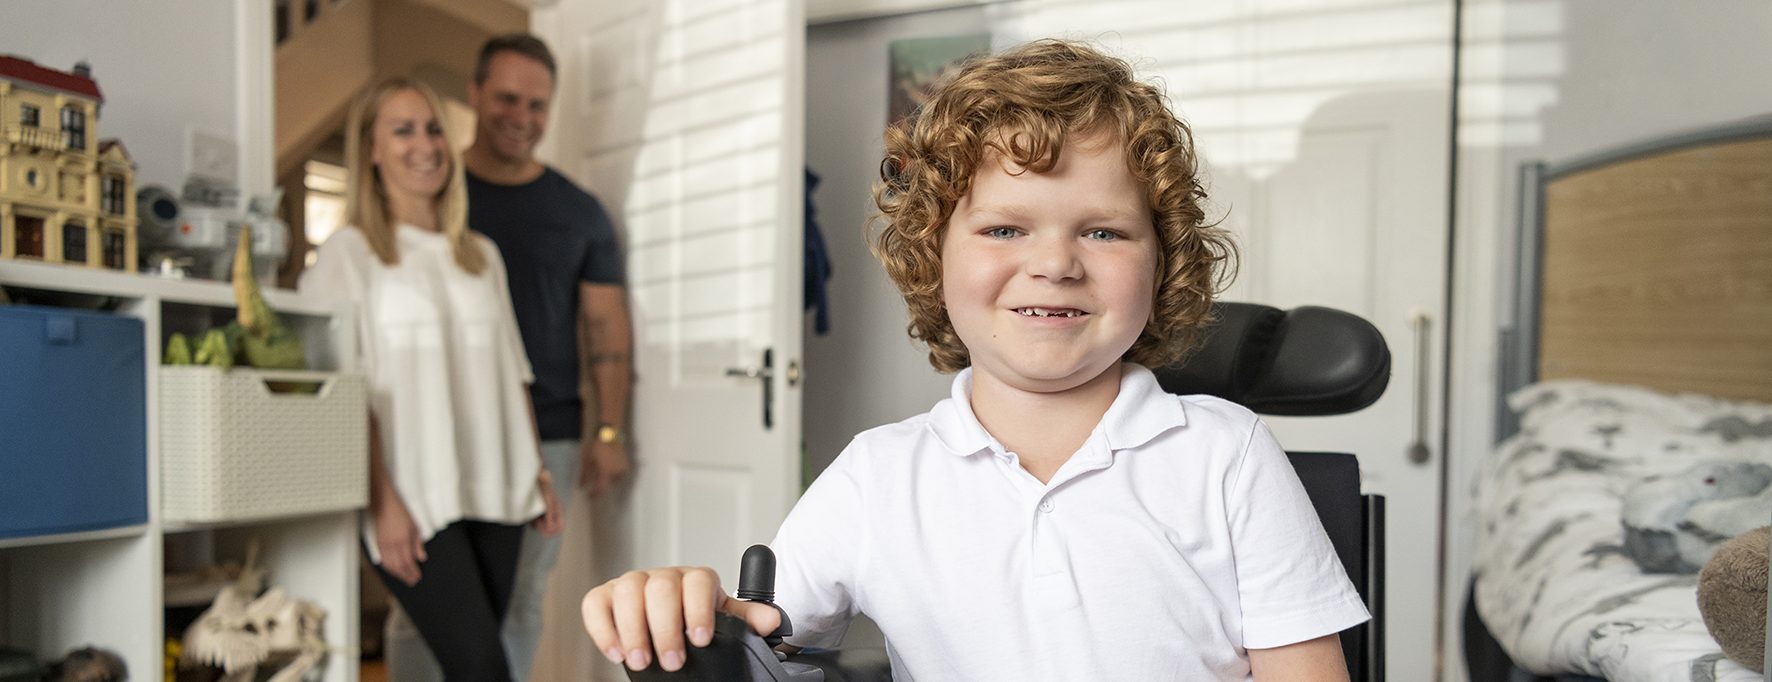 Cheerful young boy with muscular dystrophy in his bedroom, using powered wheelchair, mother and father smiling and watching in the background